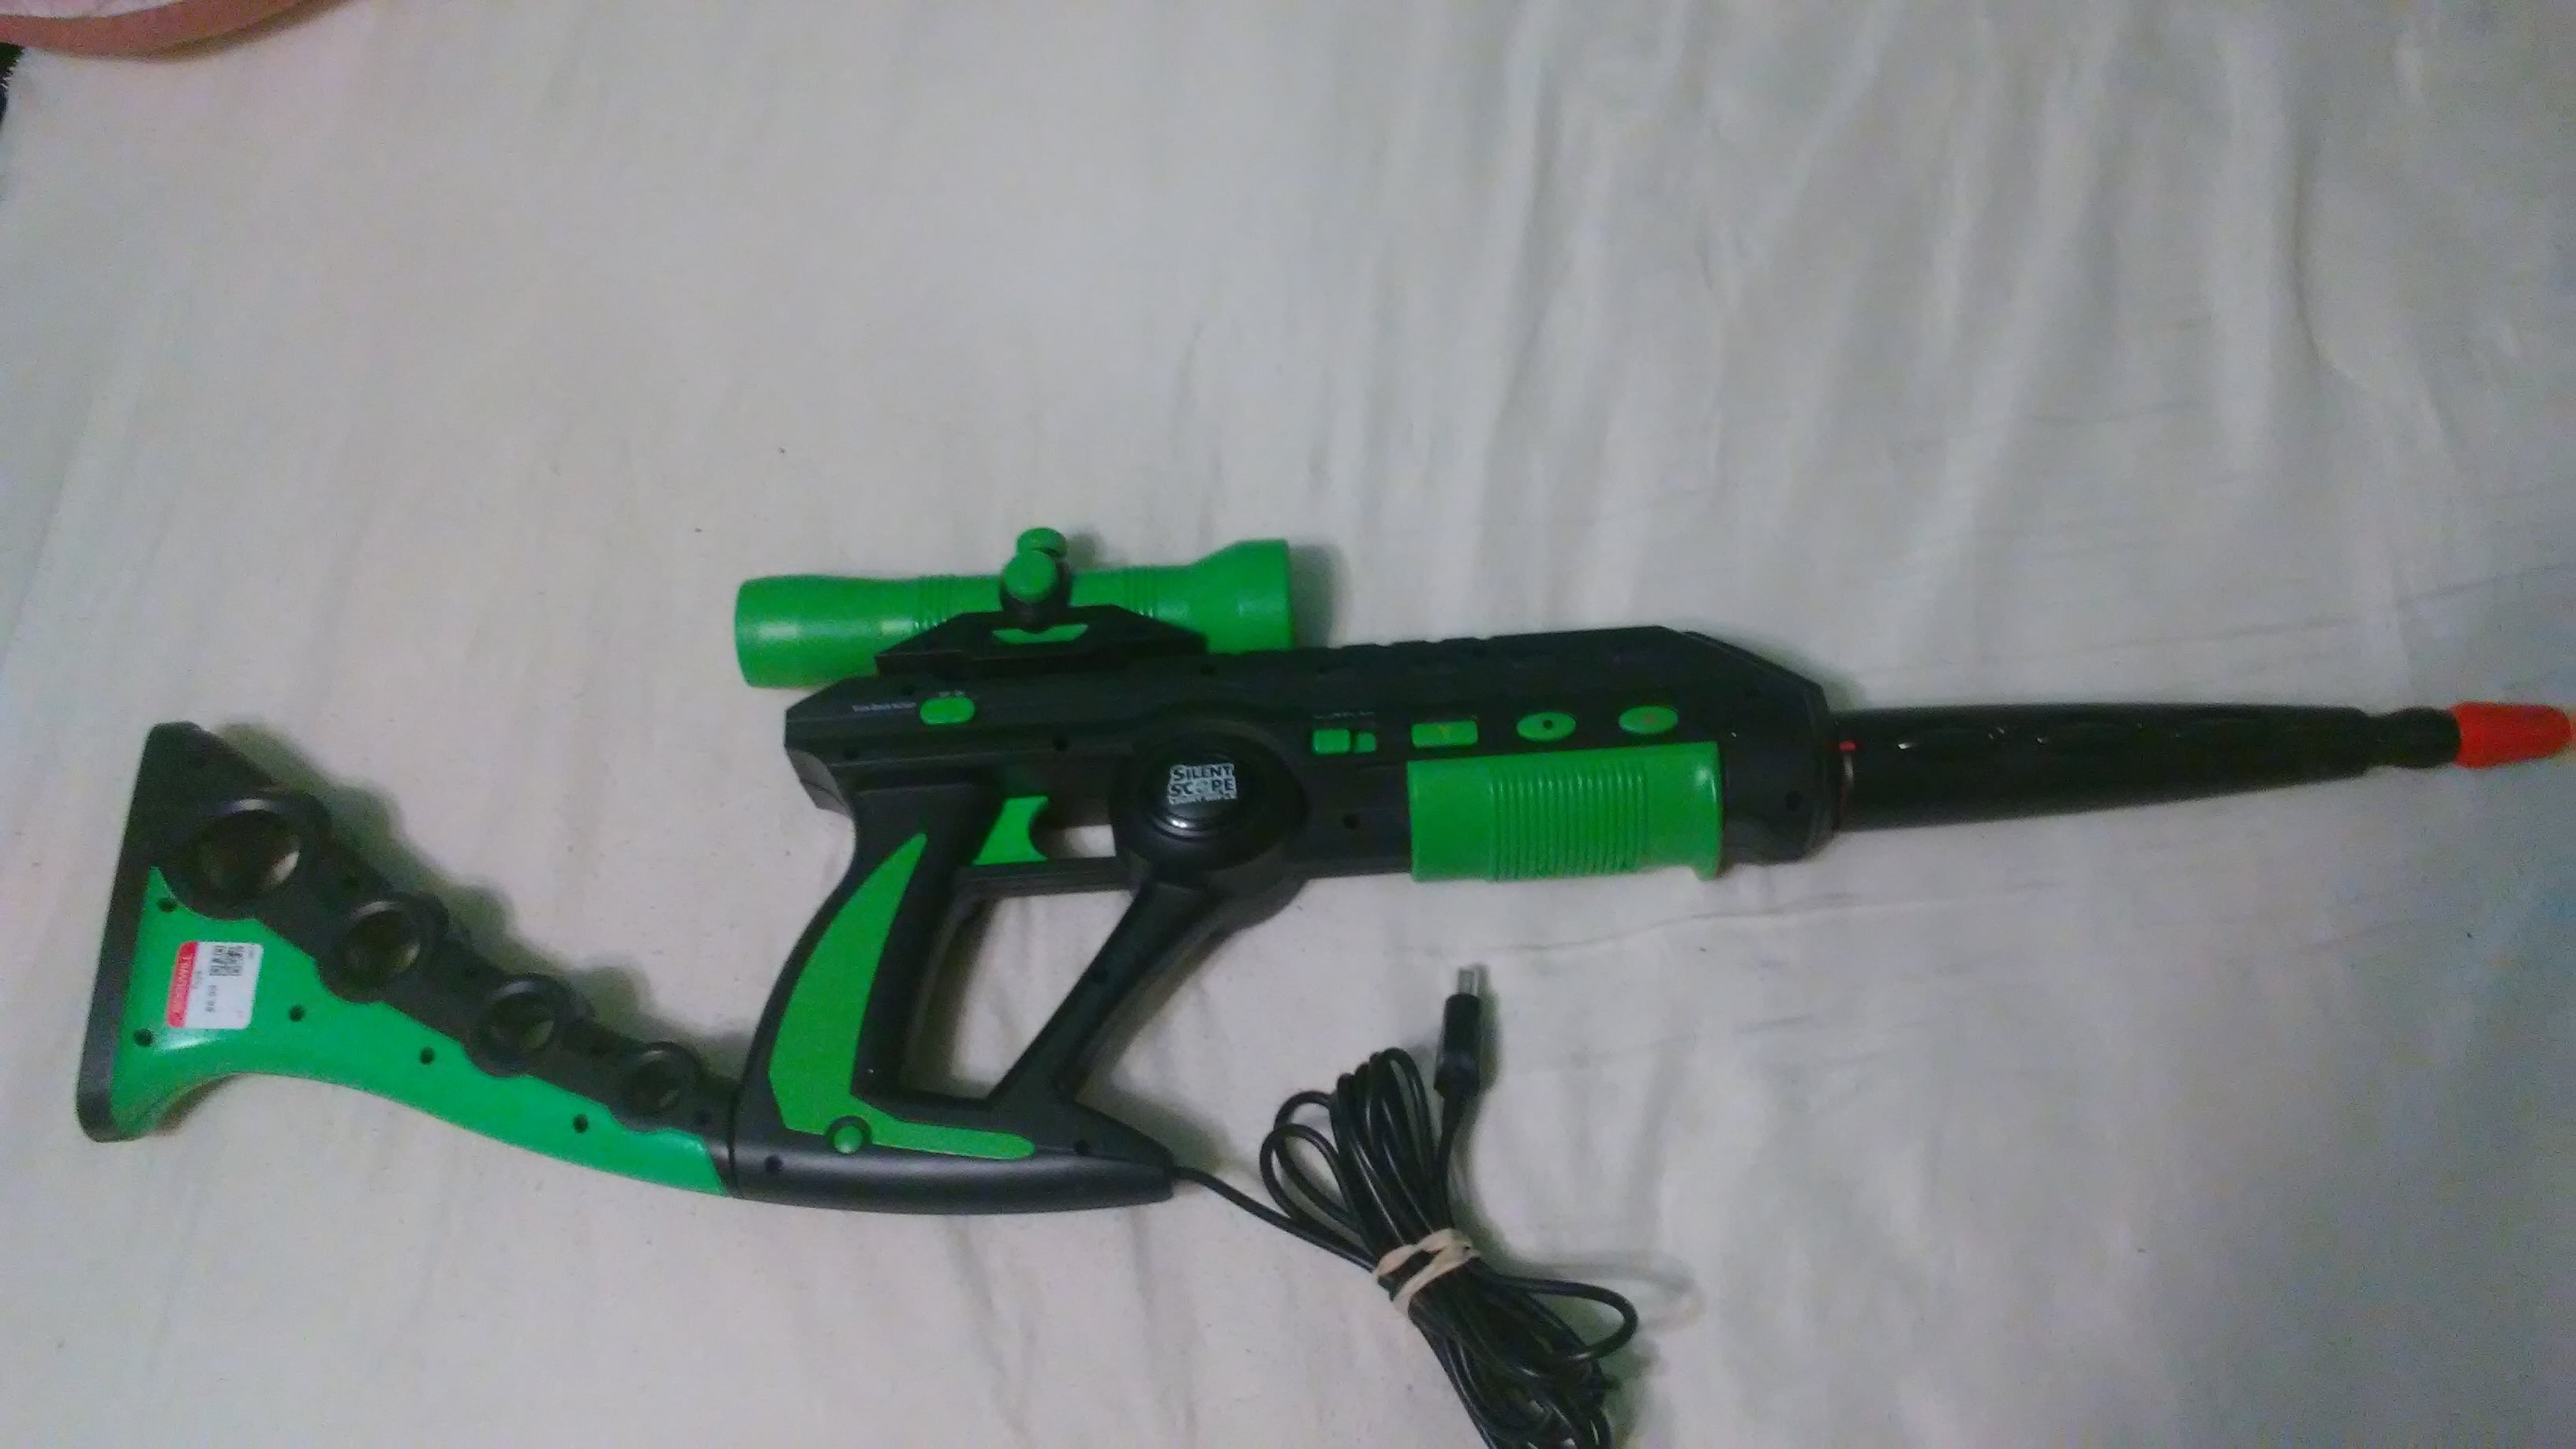 Featured Post Image - The most ridiculous light gun I own: The Silent Scope Light Rifle.